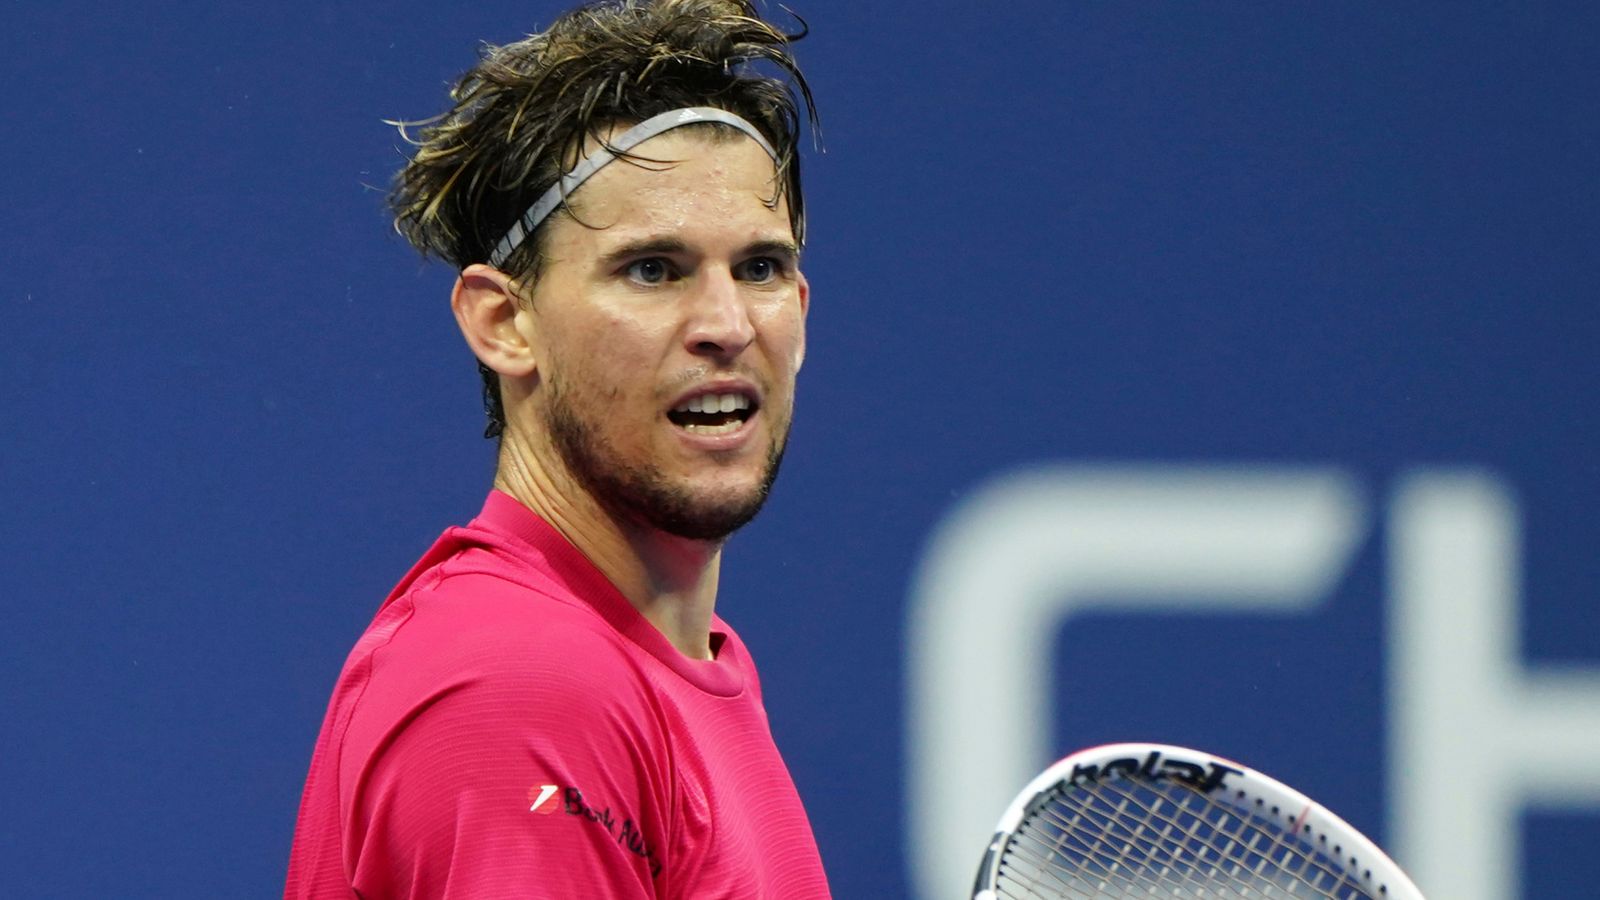 Australian Open: Dominic Thiem withdraws from upcoming ATP Cup and